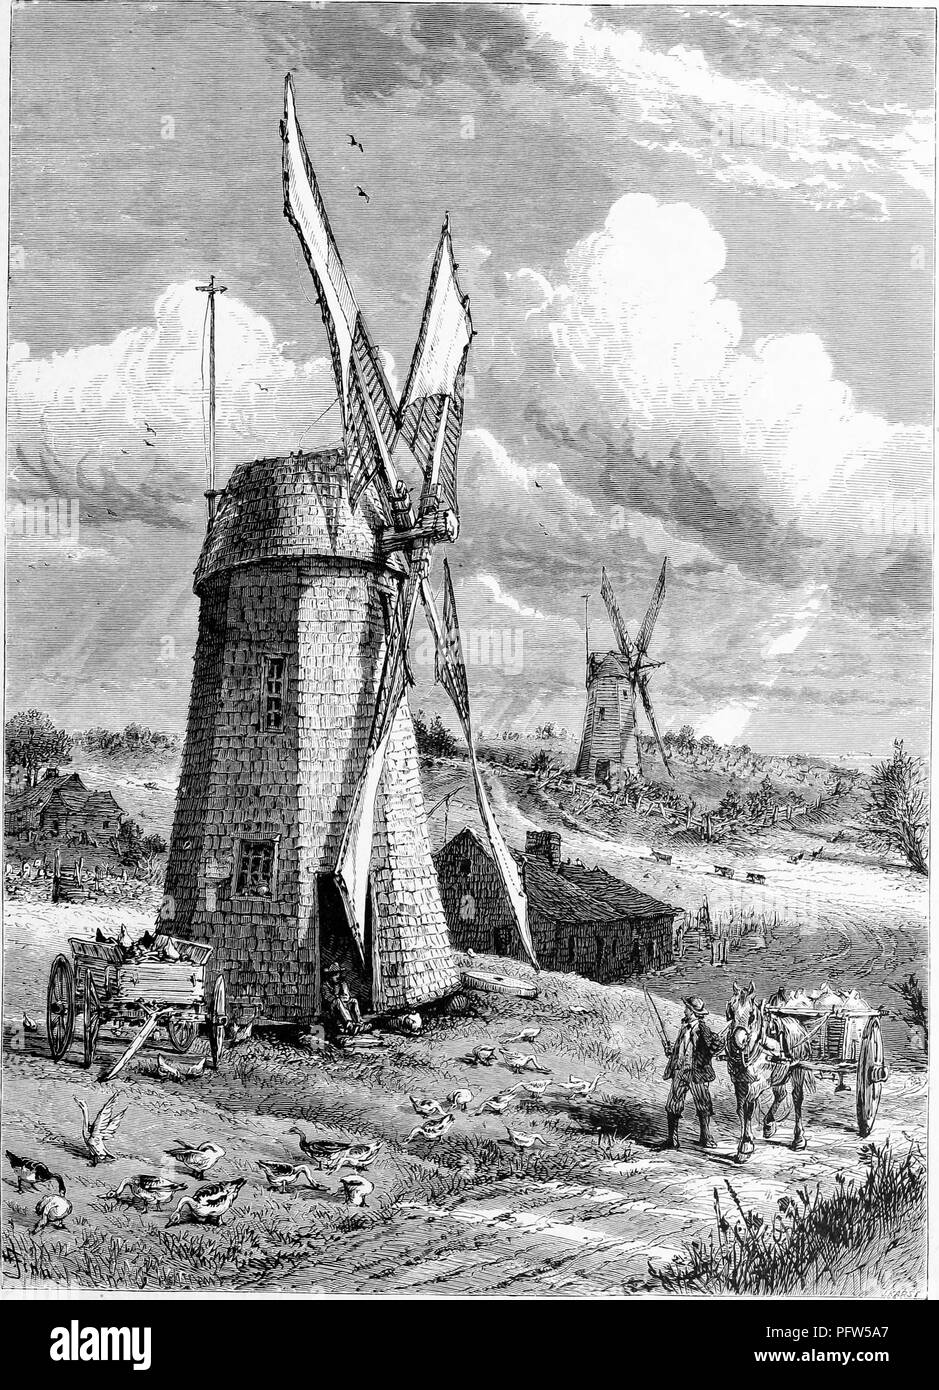 Black and a white vintage print depicting a man walking a donkey cart past a grist windmill, with houses and a second windmill in the background, located in East Hampton, on Long Island in New York, published in William Cullen Bryant's edited volume 'Picturesque America; or, The Land We Live In', 1872. Courtesy Internet Archive. () Stock Photo